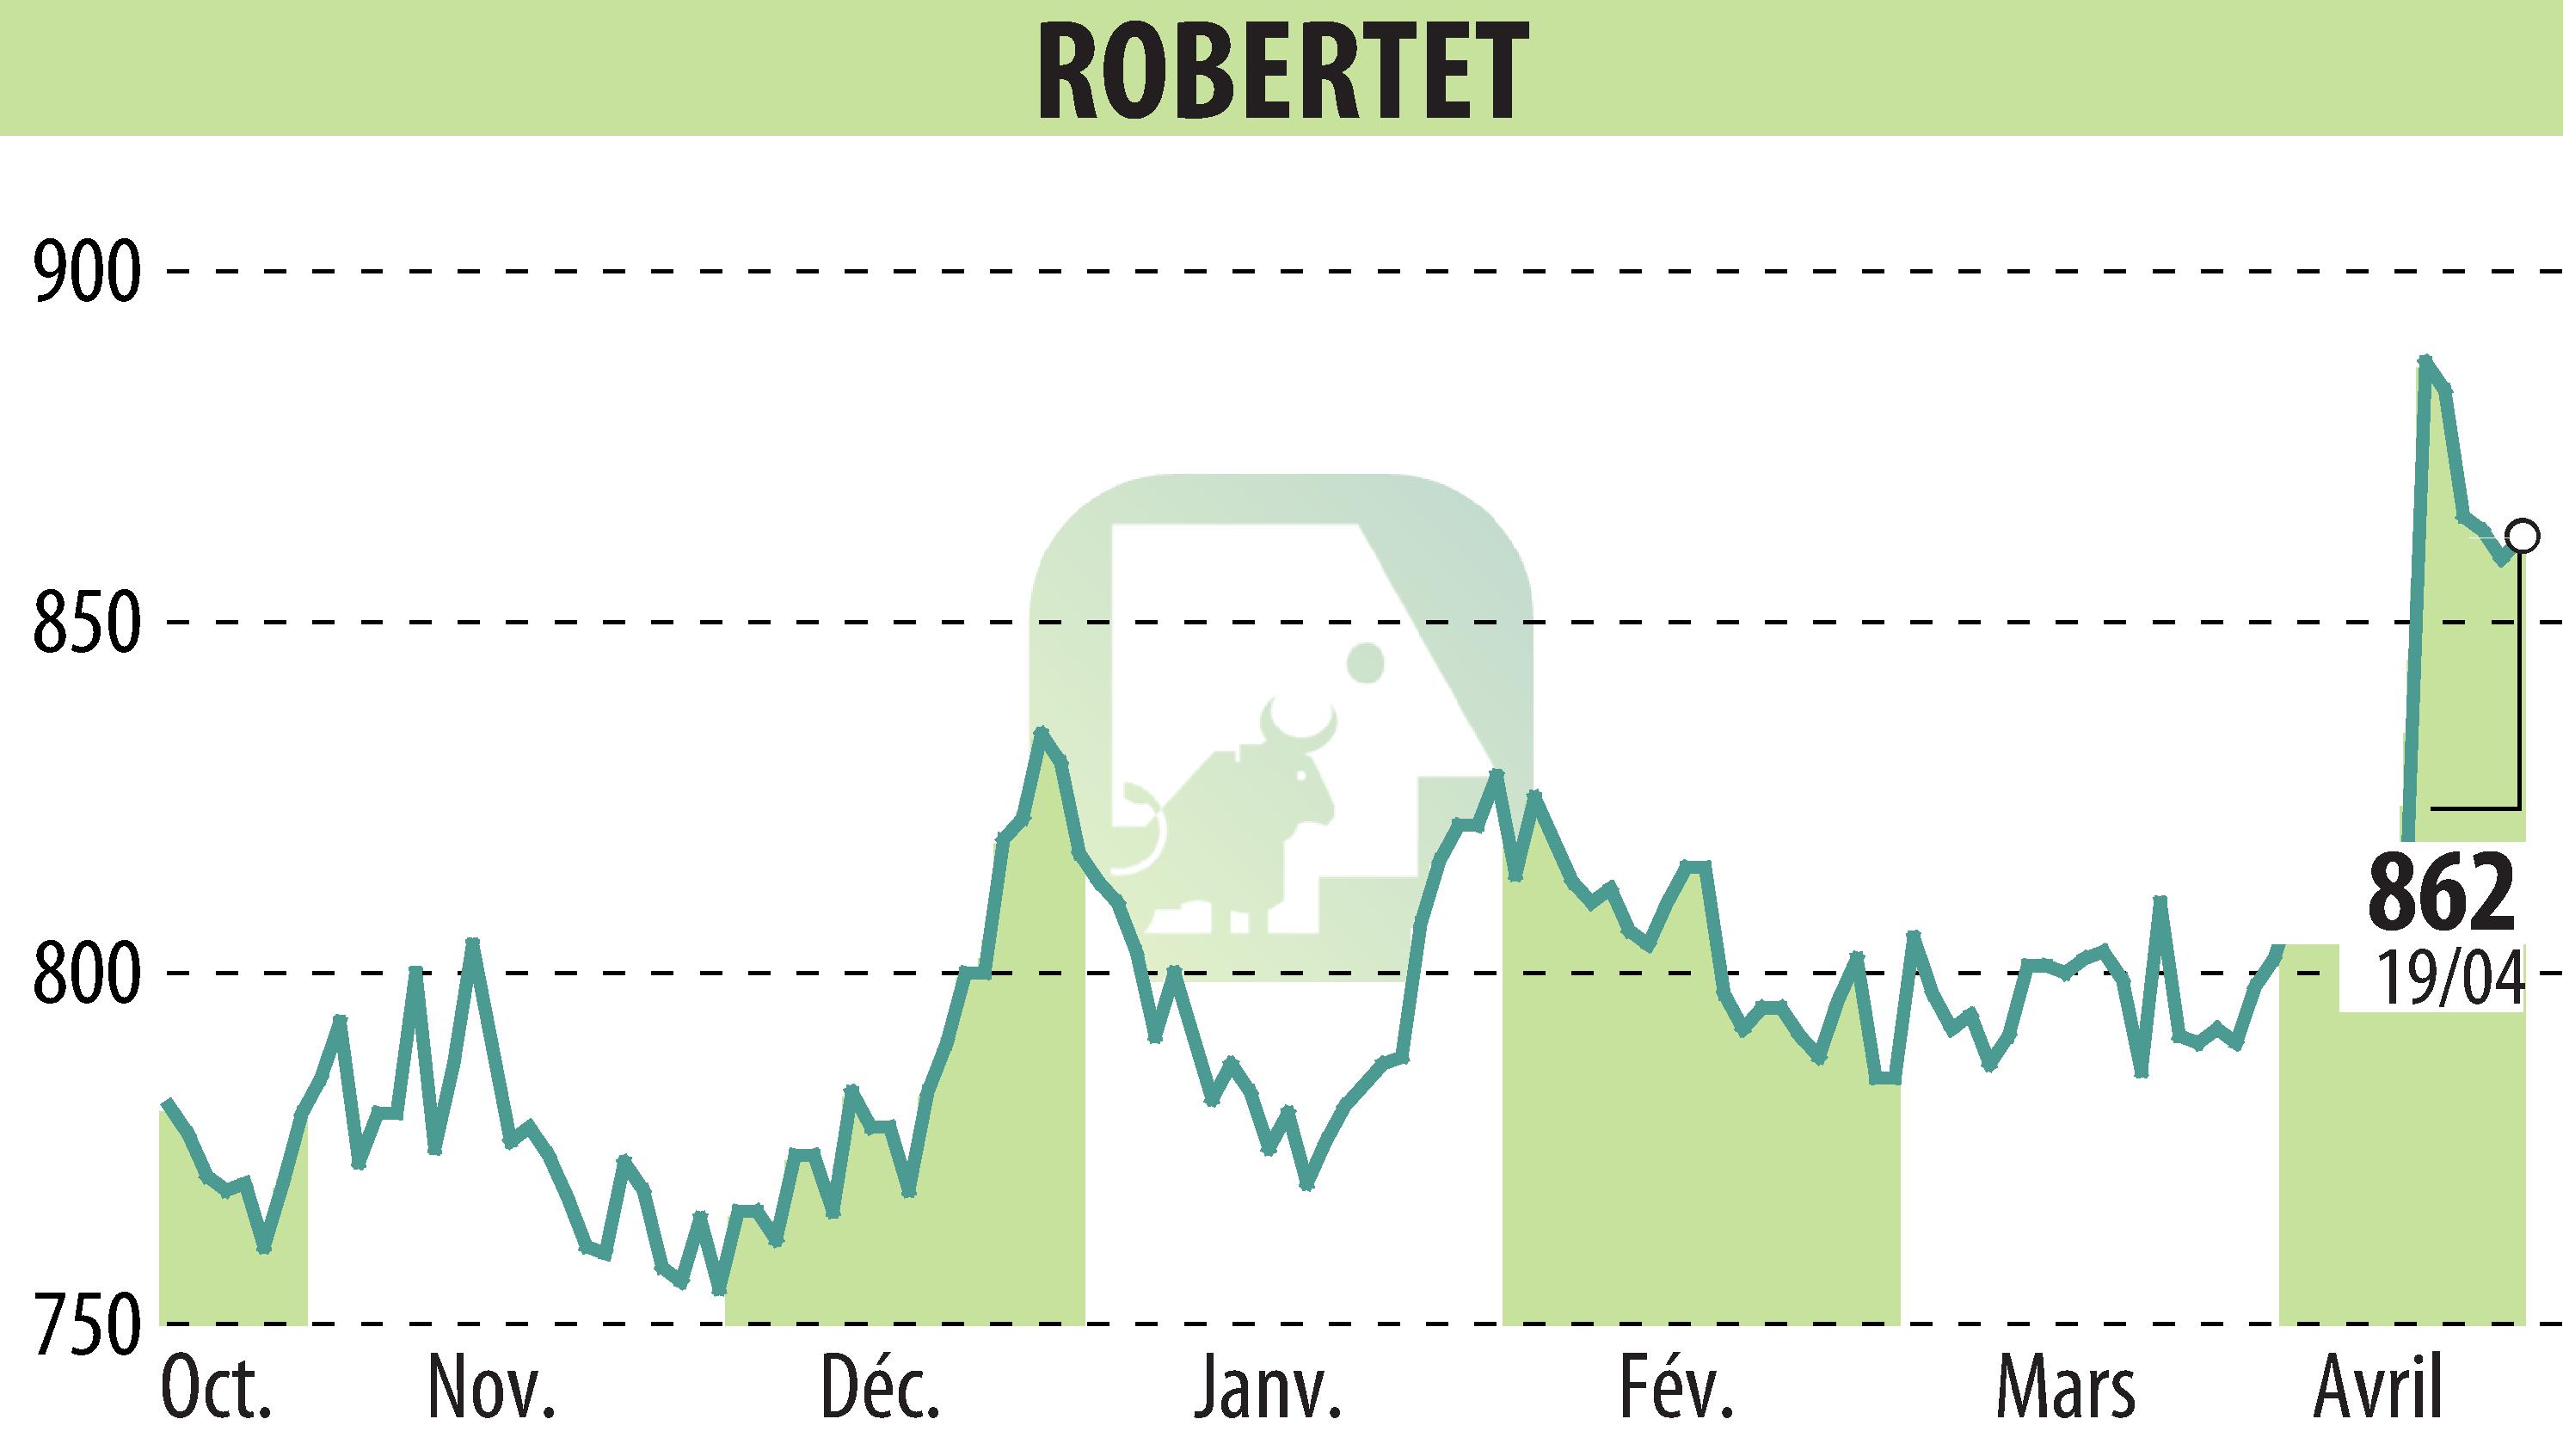 Stock price chart of ROBERTET (EPA:RBT) showing fluctuations.